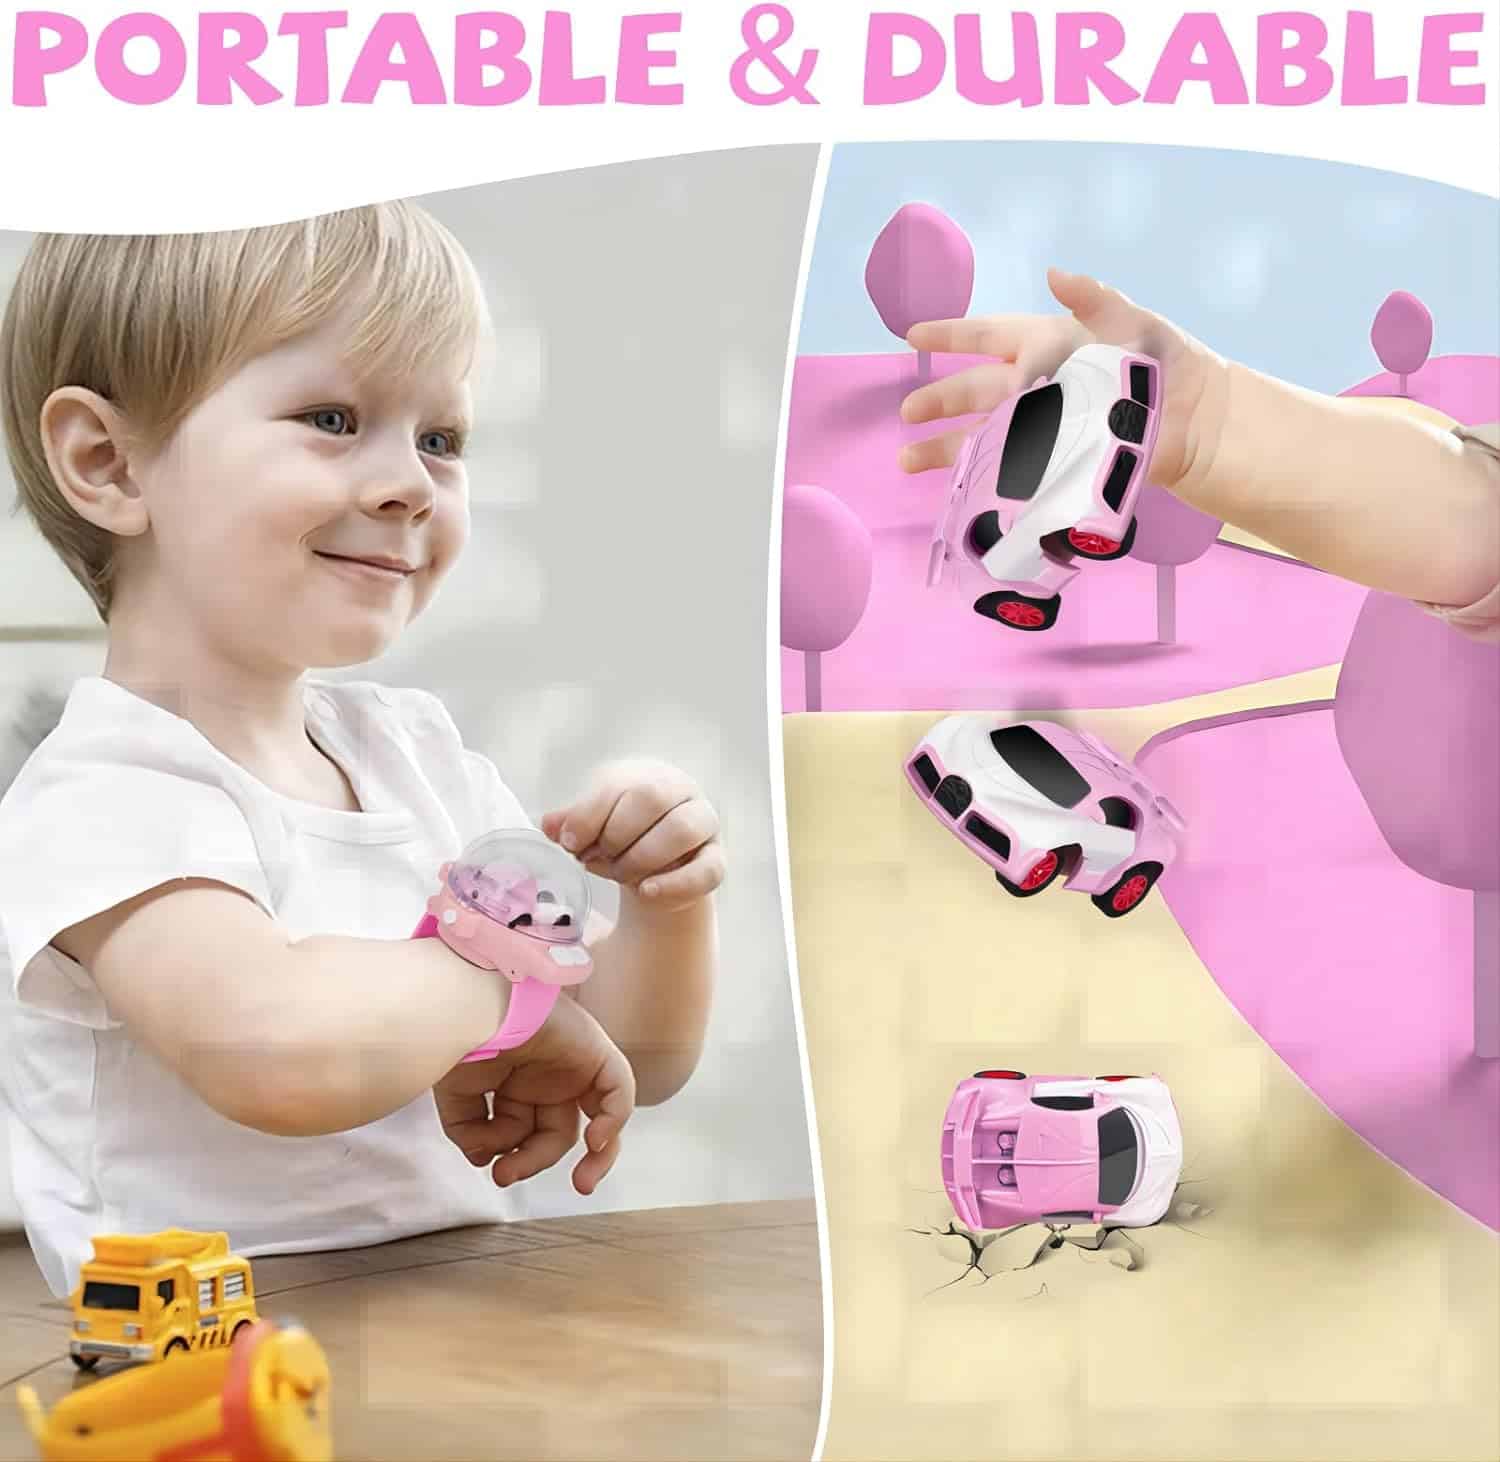 Race Car Toys, Mini Remote Control Car Watch Toys for Toddlers: A Fun and Educational Review